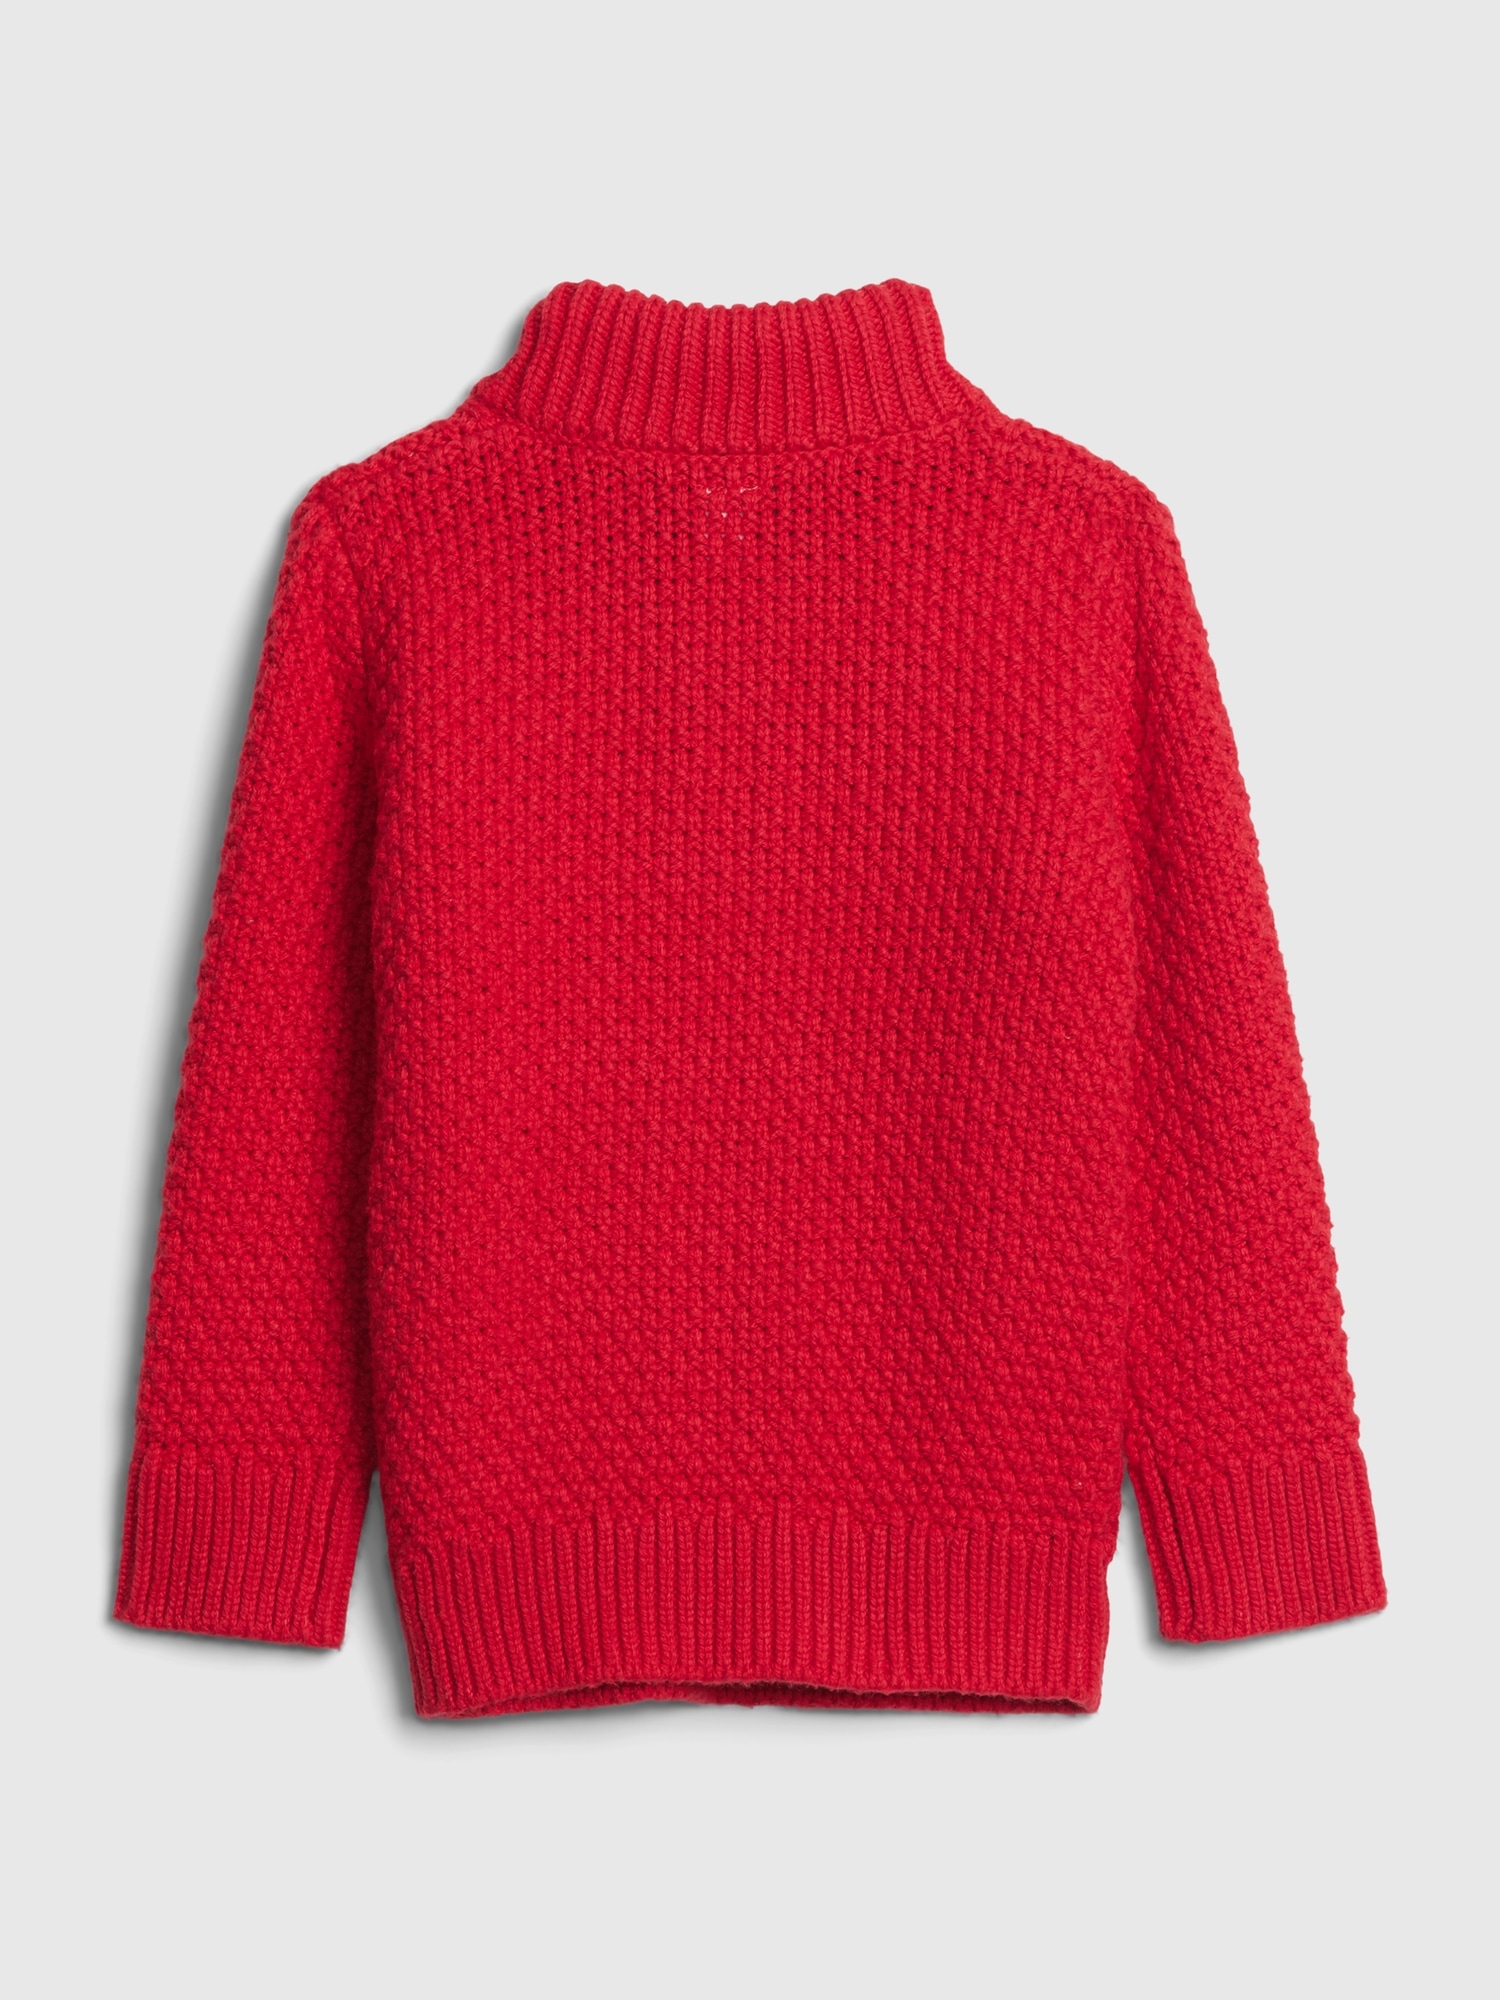 Knit Sweater - Bright red - Ladies